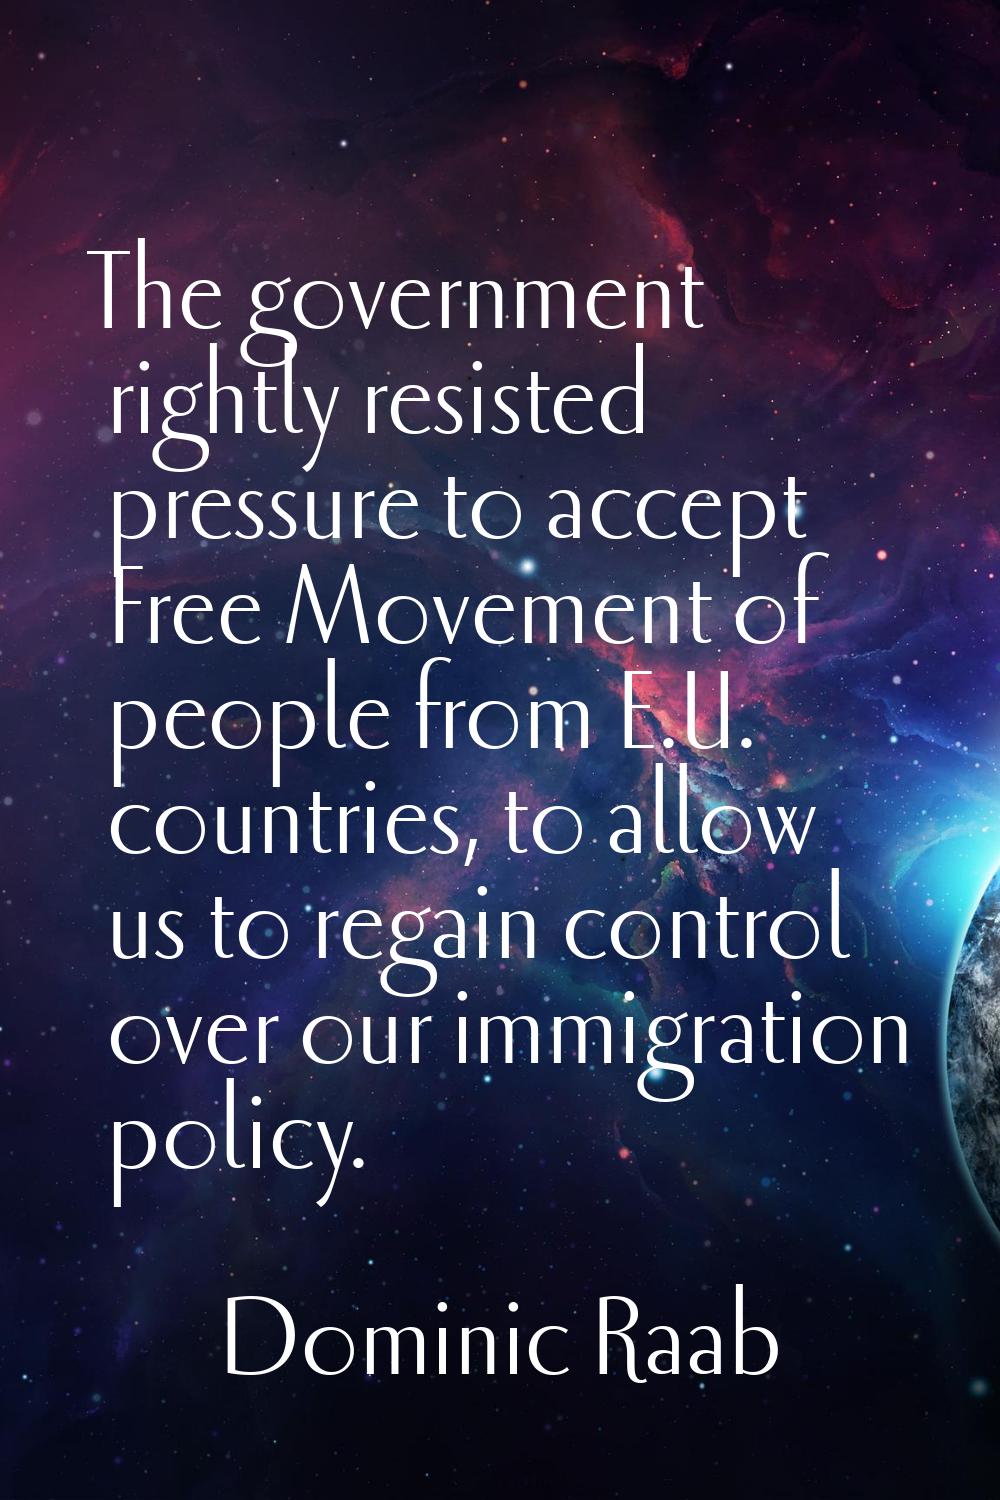 The government rightly resisted pressure to accept Free Movement of people from E.U. countries, to 